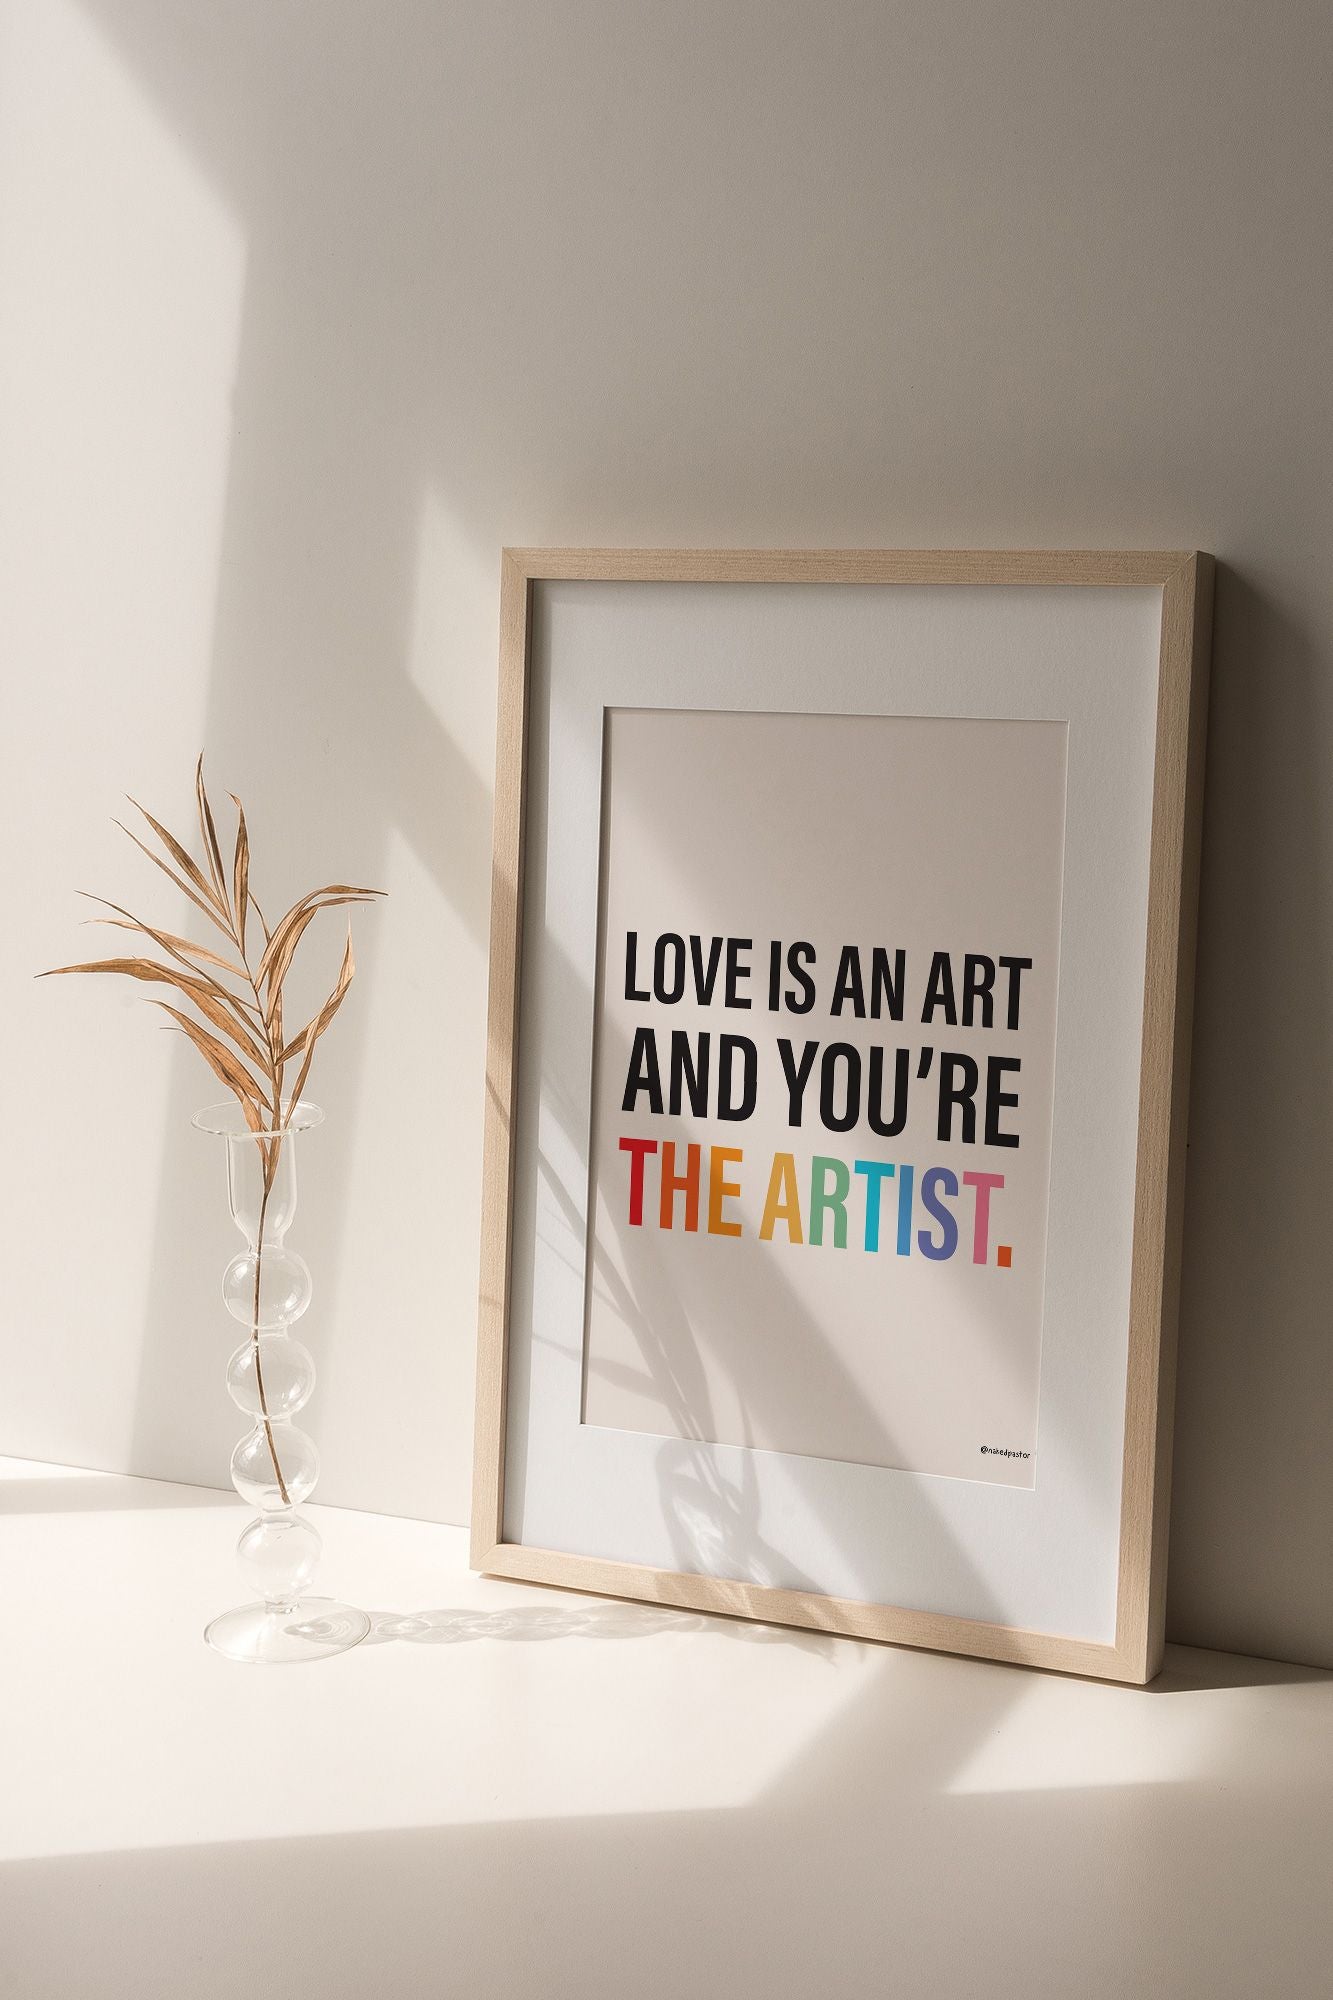 Love Is An Art and You're The Artist